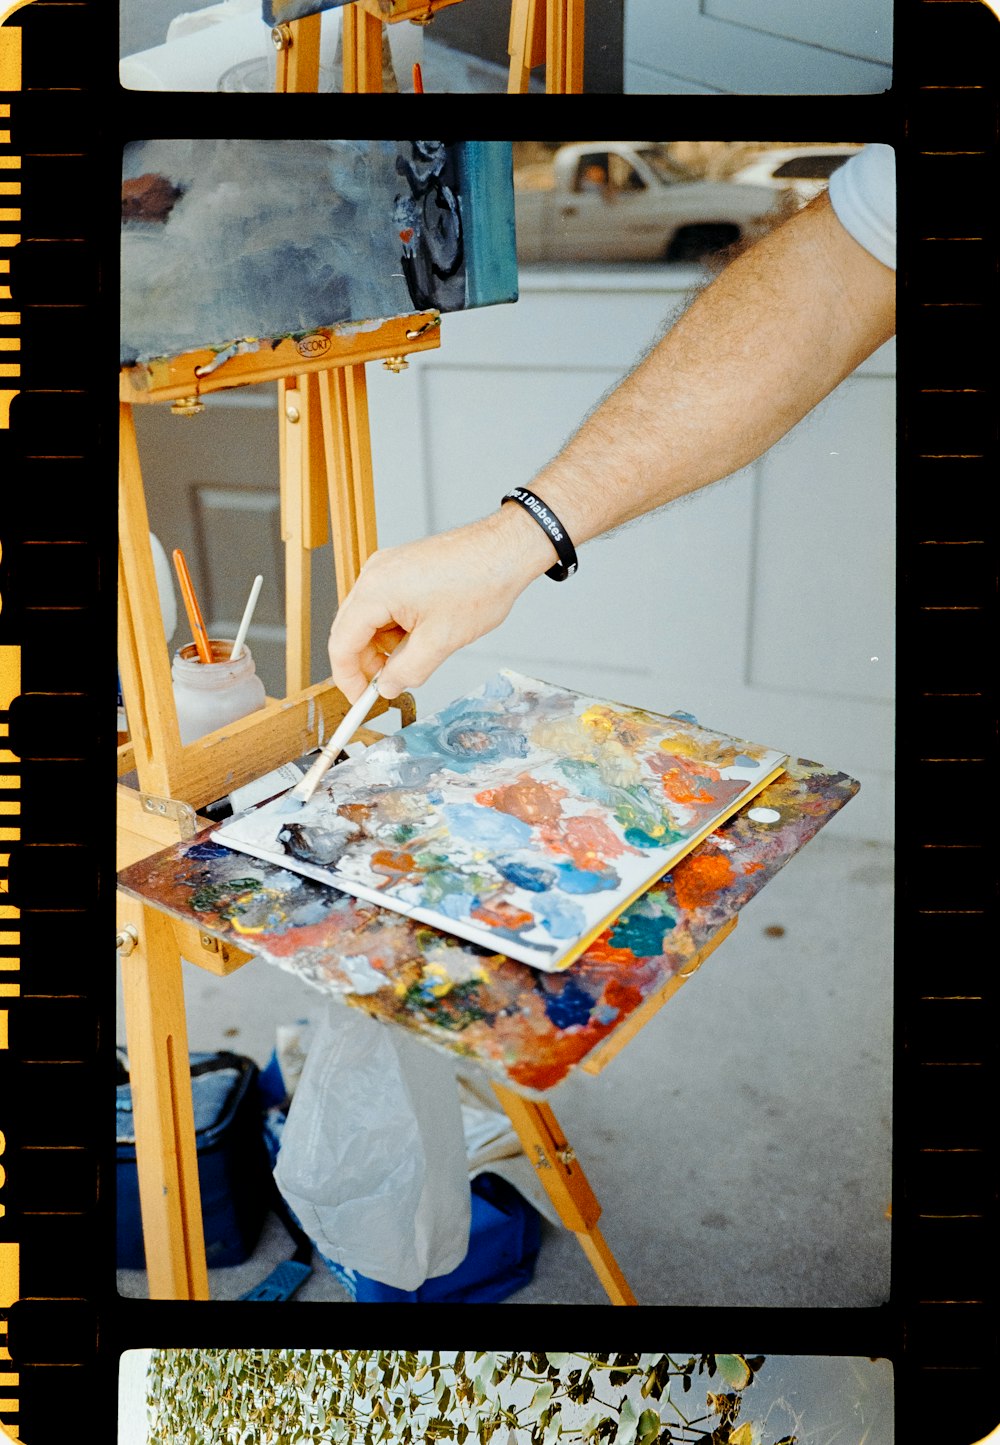 a man is painting a picture on an easel